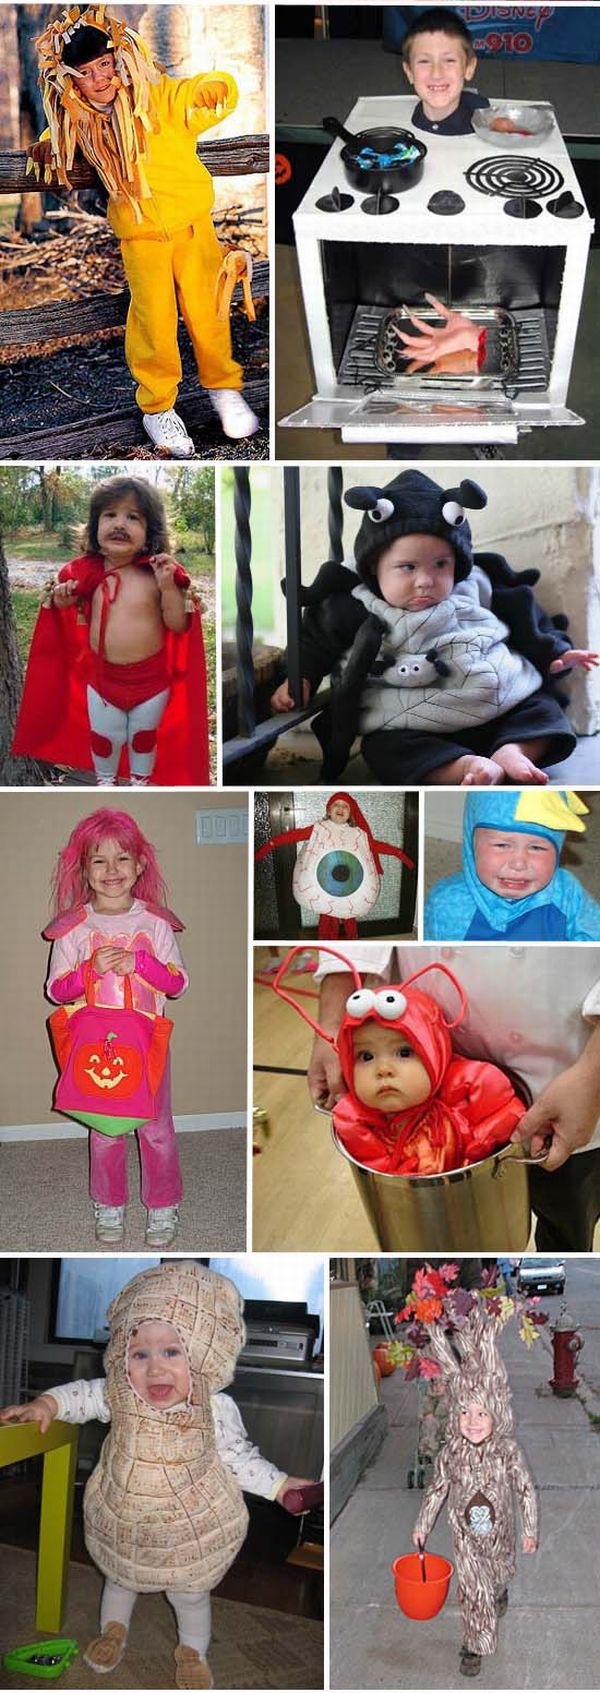 Hilarious Halloween costumes handmade by parents (25 images)